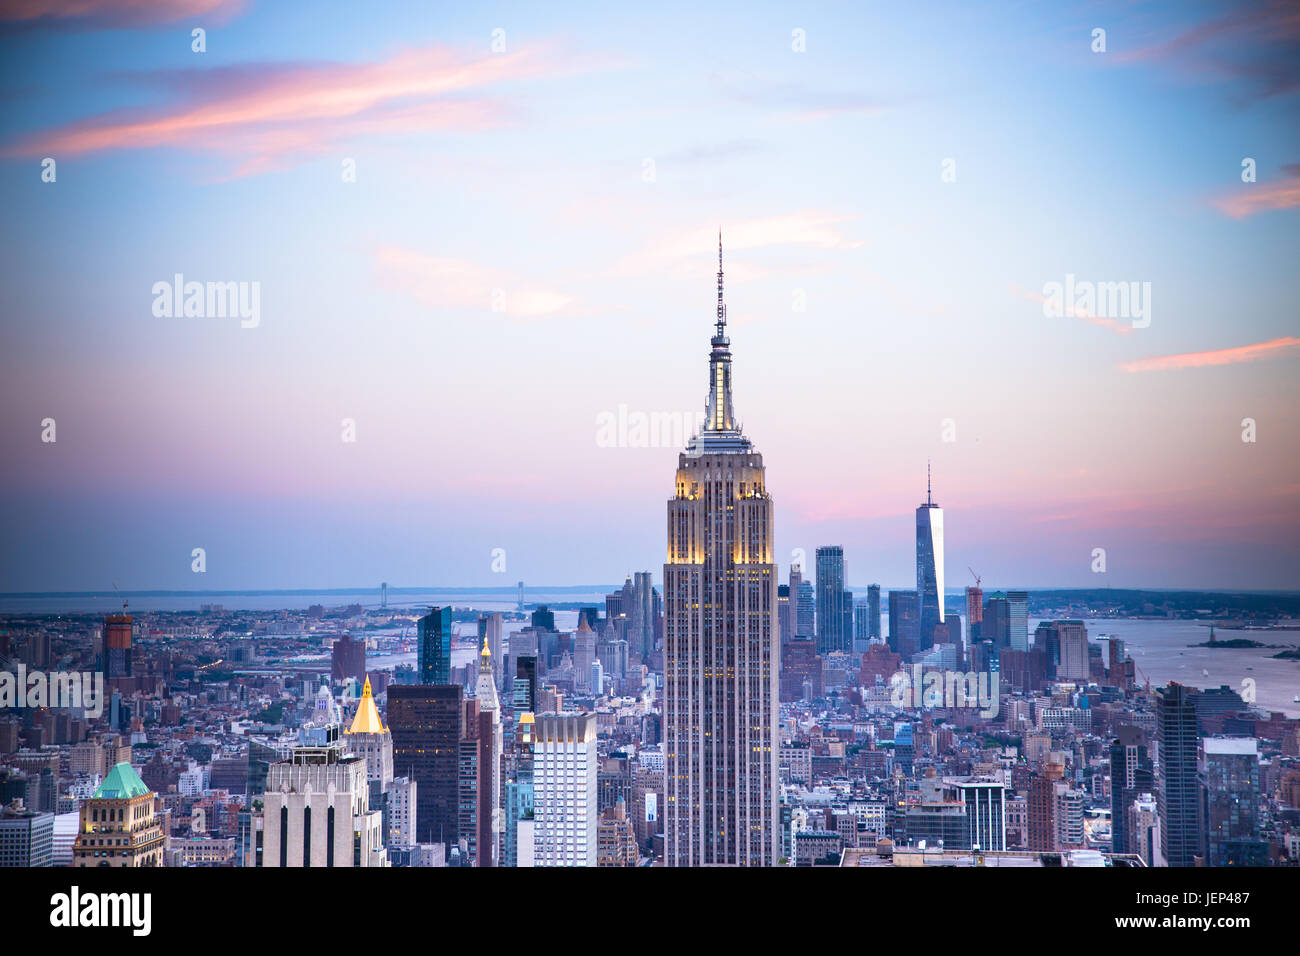 Sunset view of New York City seen from midtown Manhattan looking towards downtown, Stock Photo